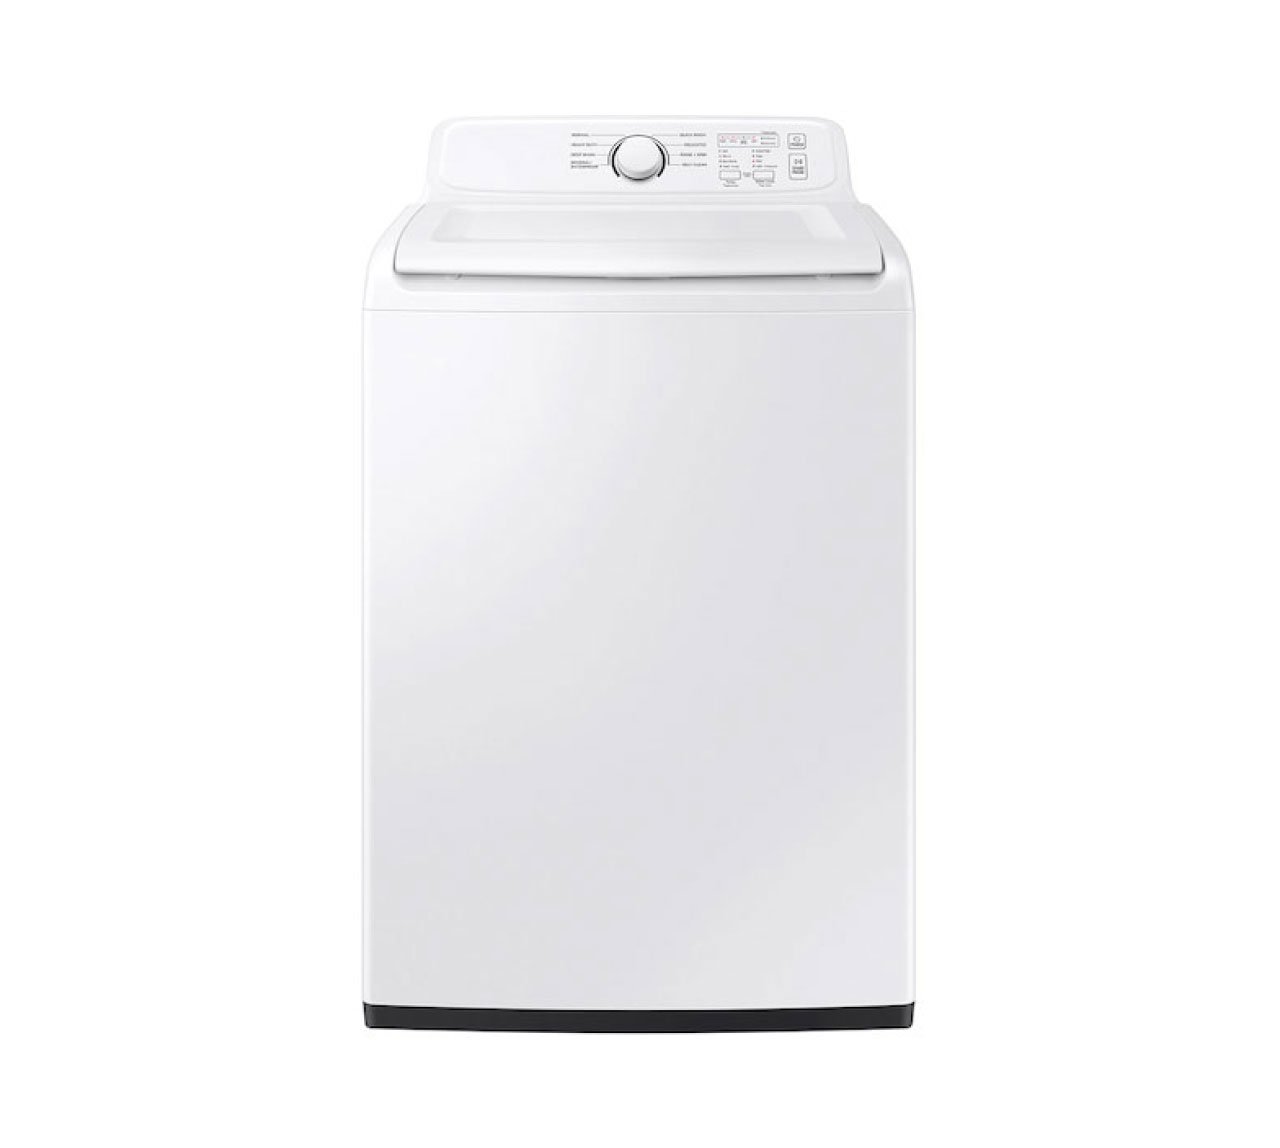 Haier Dryer Troubleshooting